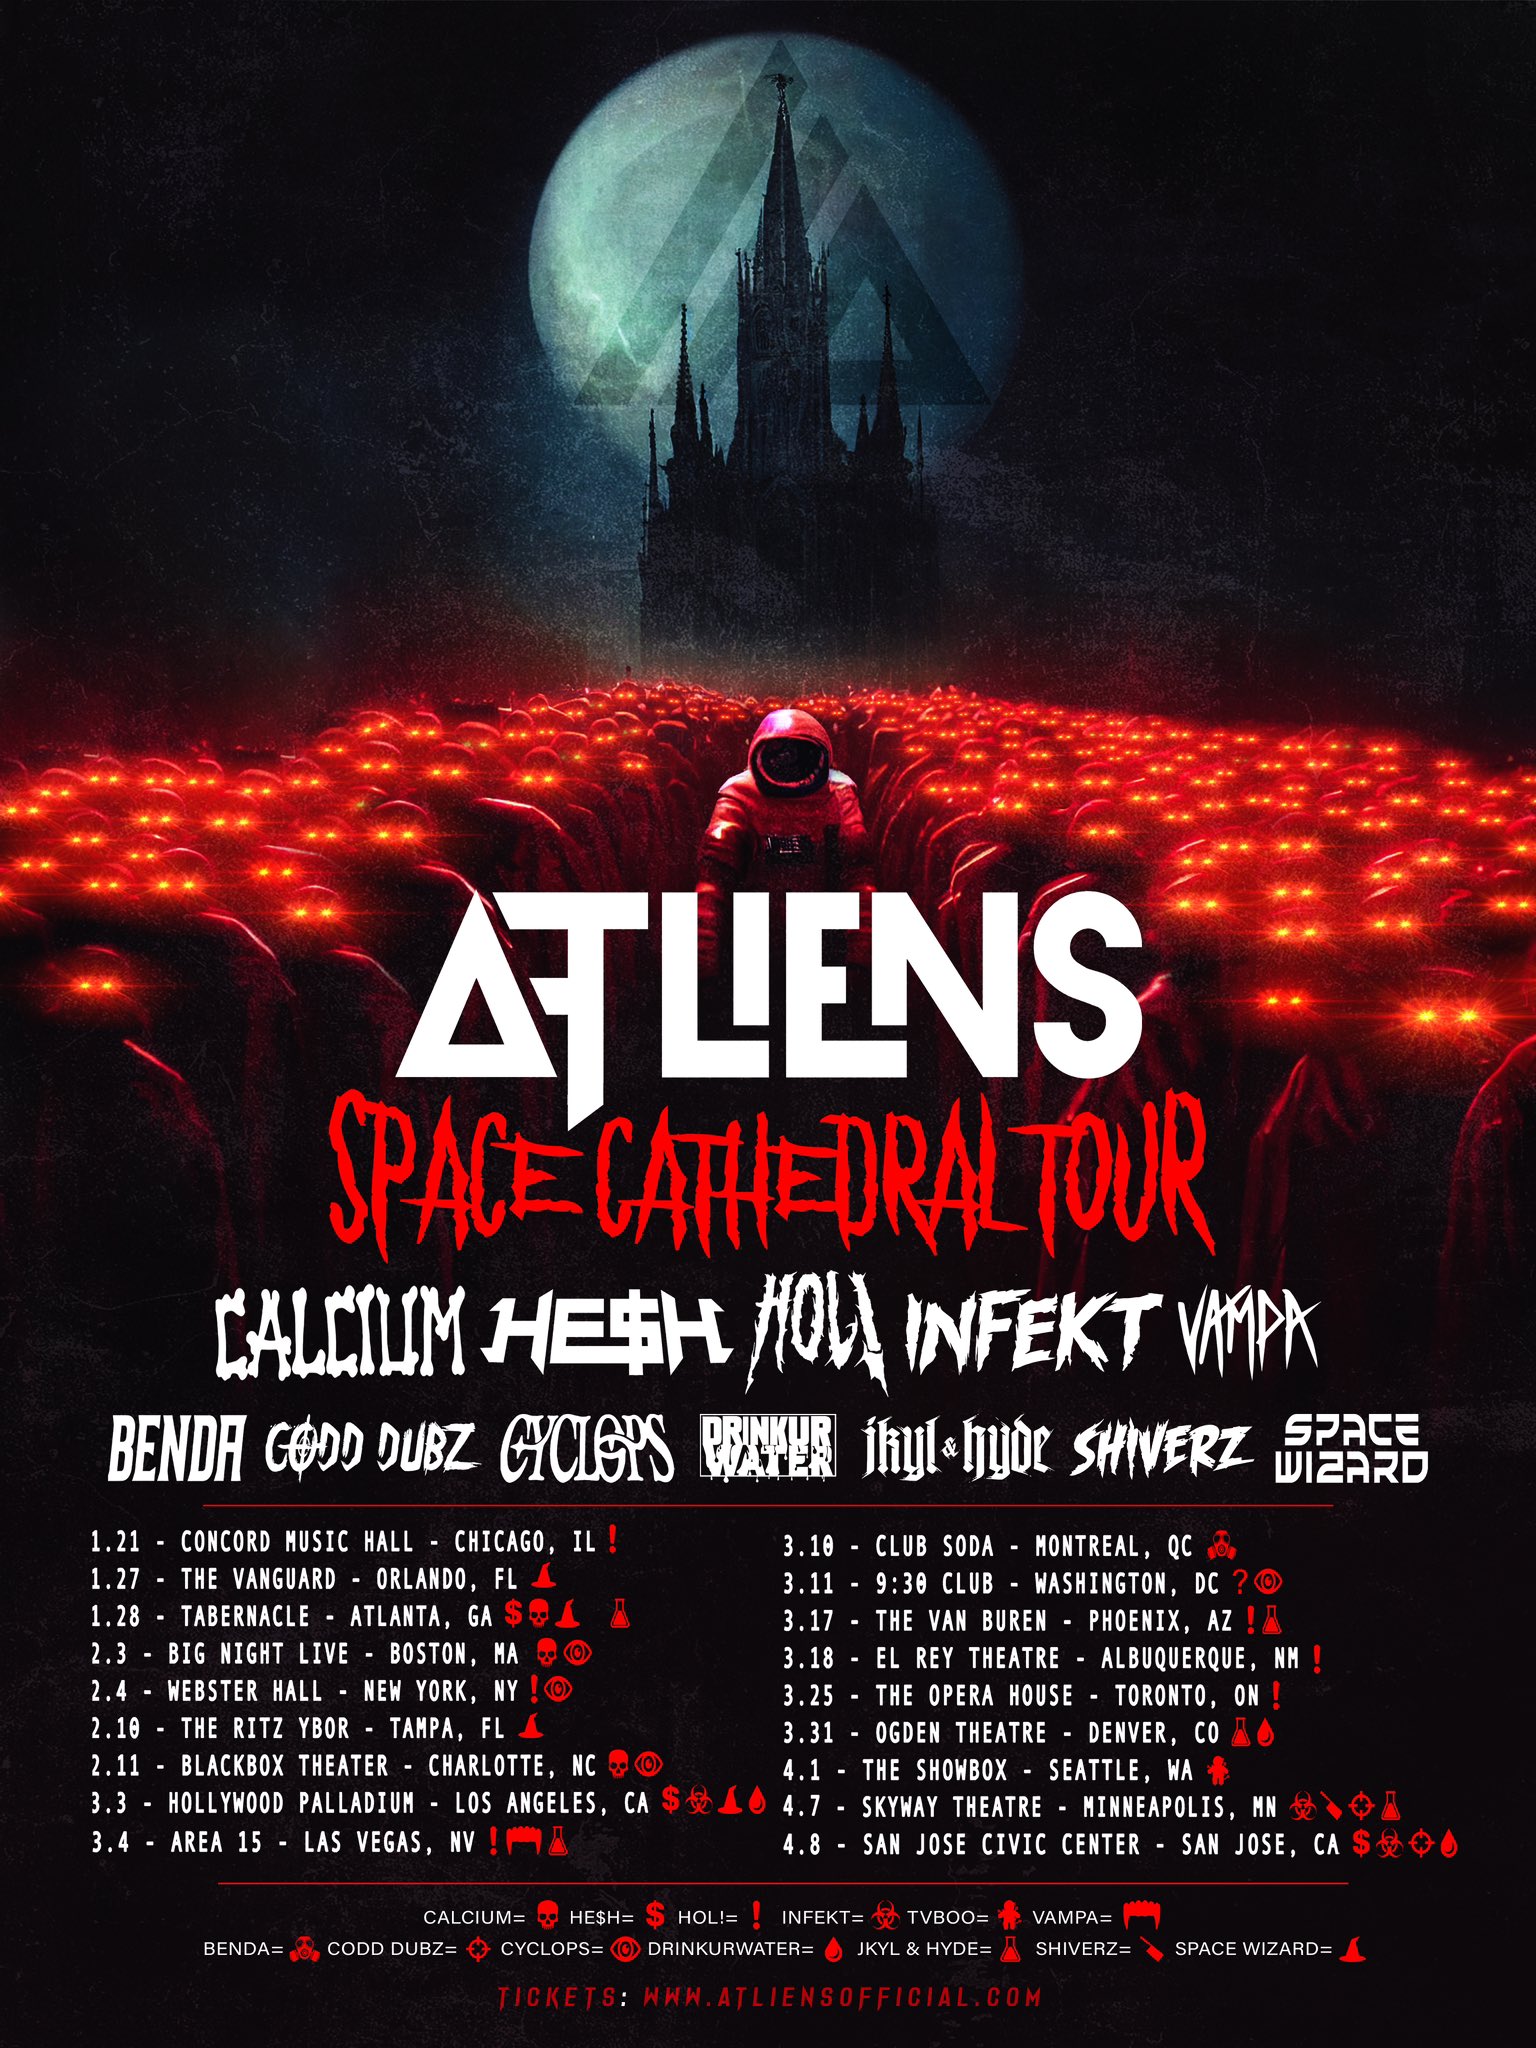 atliens-space-cathedral-tour-seattle